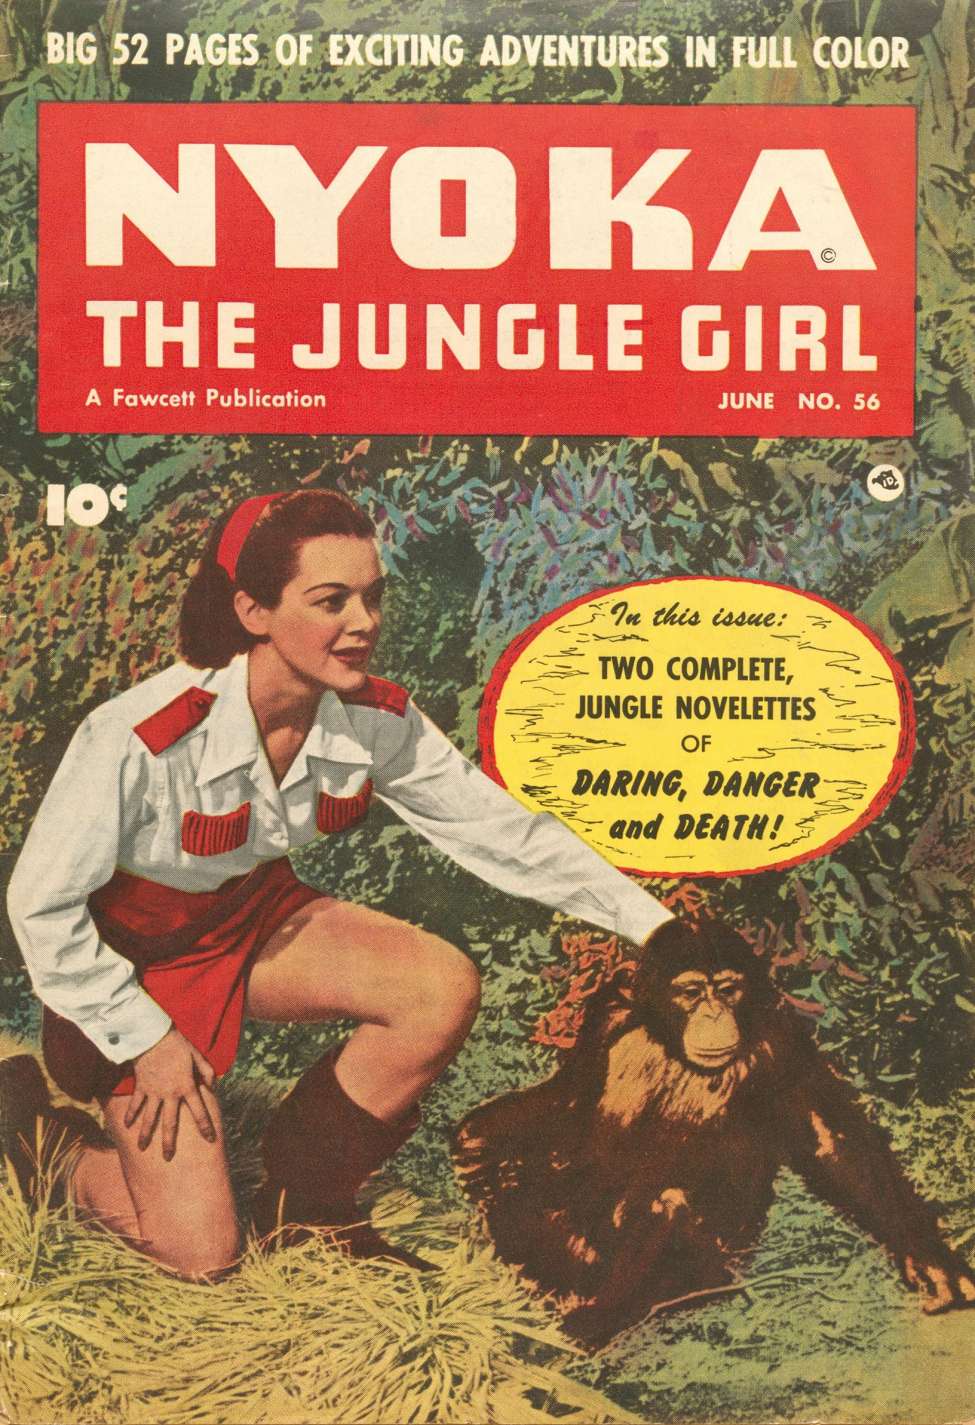 Book Cover For Nyoka the Jungle Girl 56 - Version 2